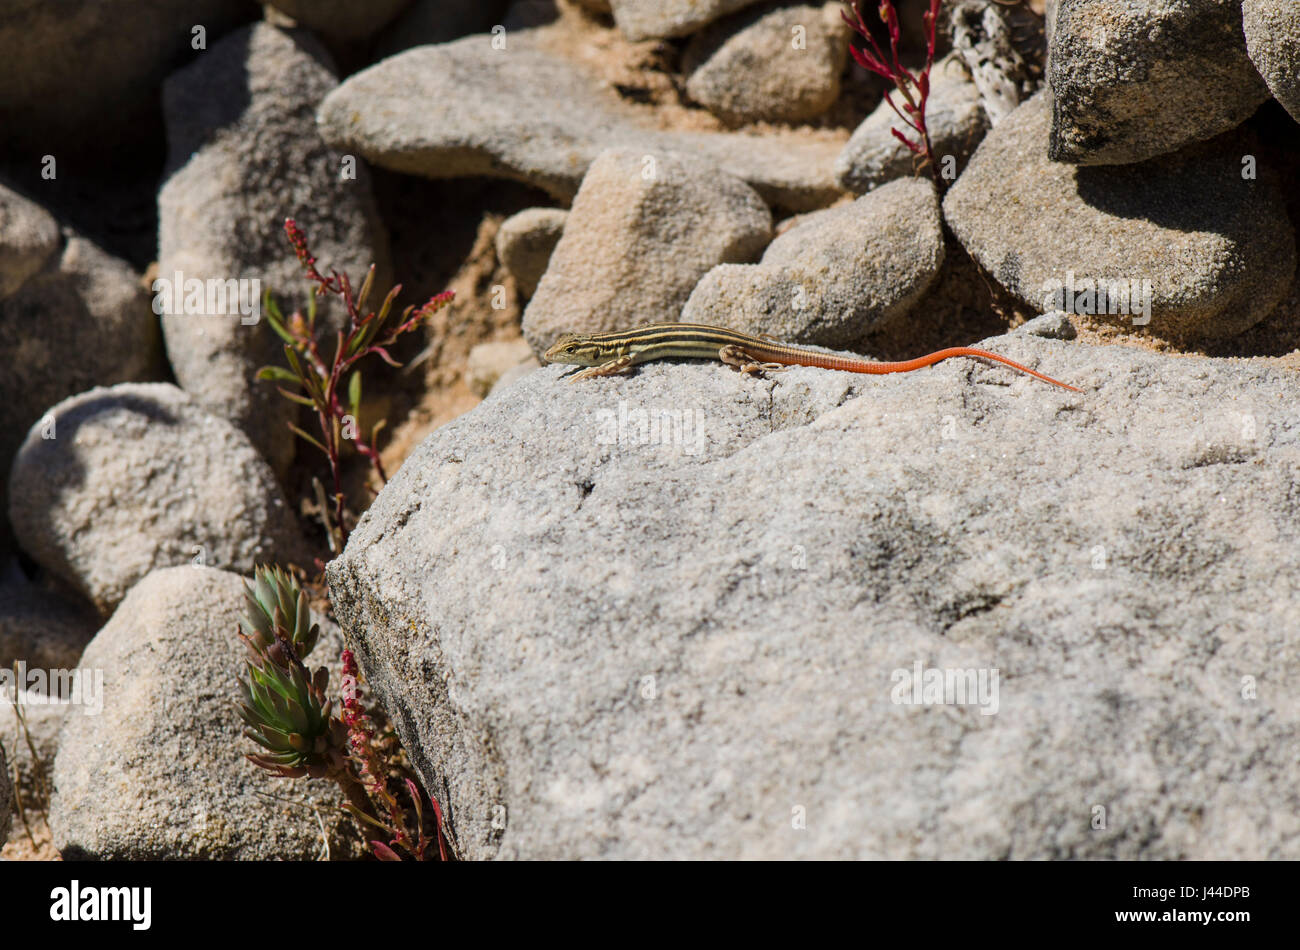 Juvenile spiny-footed lizard, lizards, reptile, acanthodactylus erythrurus basking on rocks. andalusia, Spain. Stock Photo